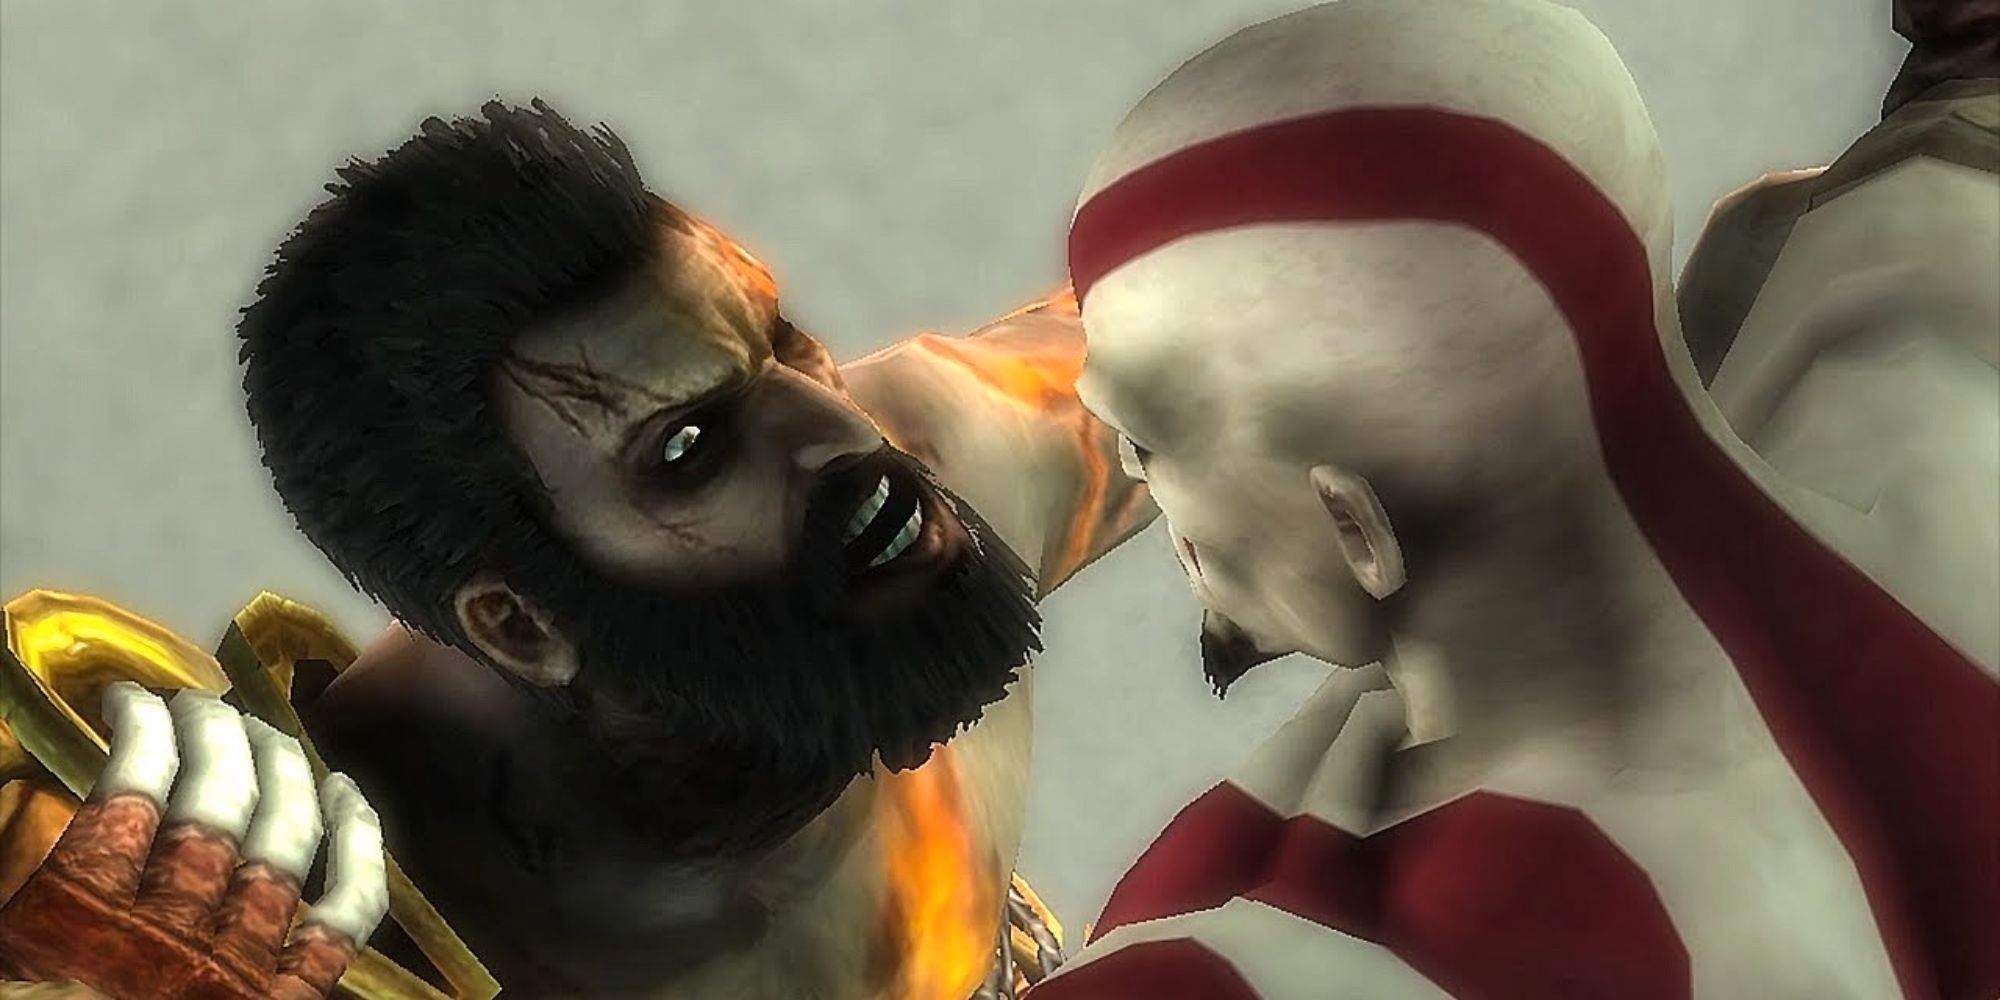 Ares kidnaps Deimos, and attempts to kill Kratos when he tries to intervene...